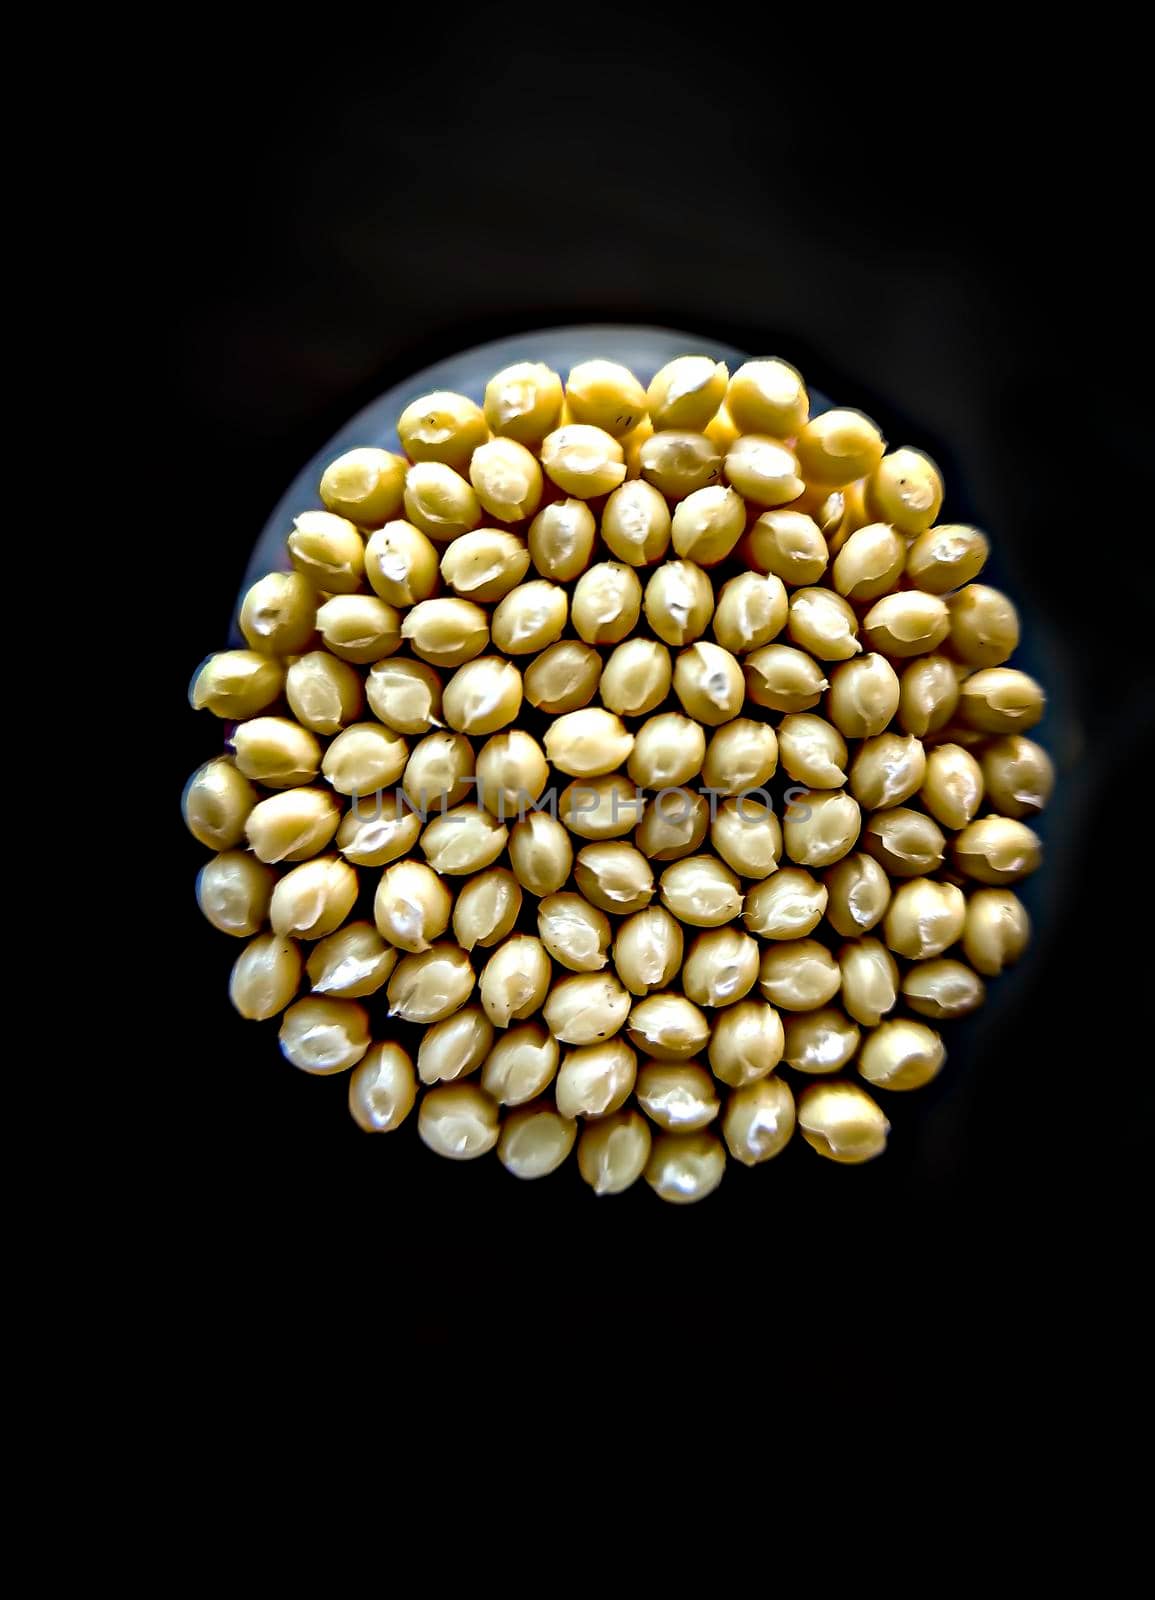 Extreme close up image of toothpick stick tips kept in a jar. by lalam